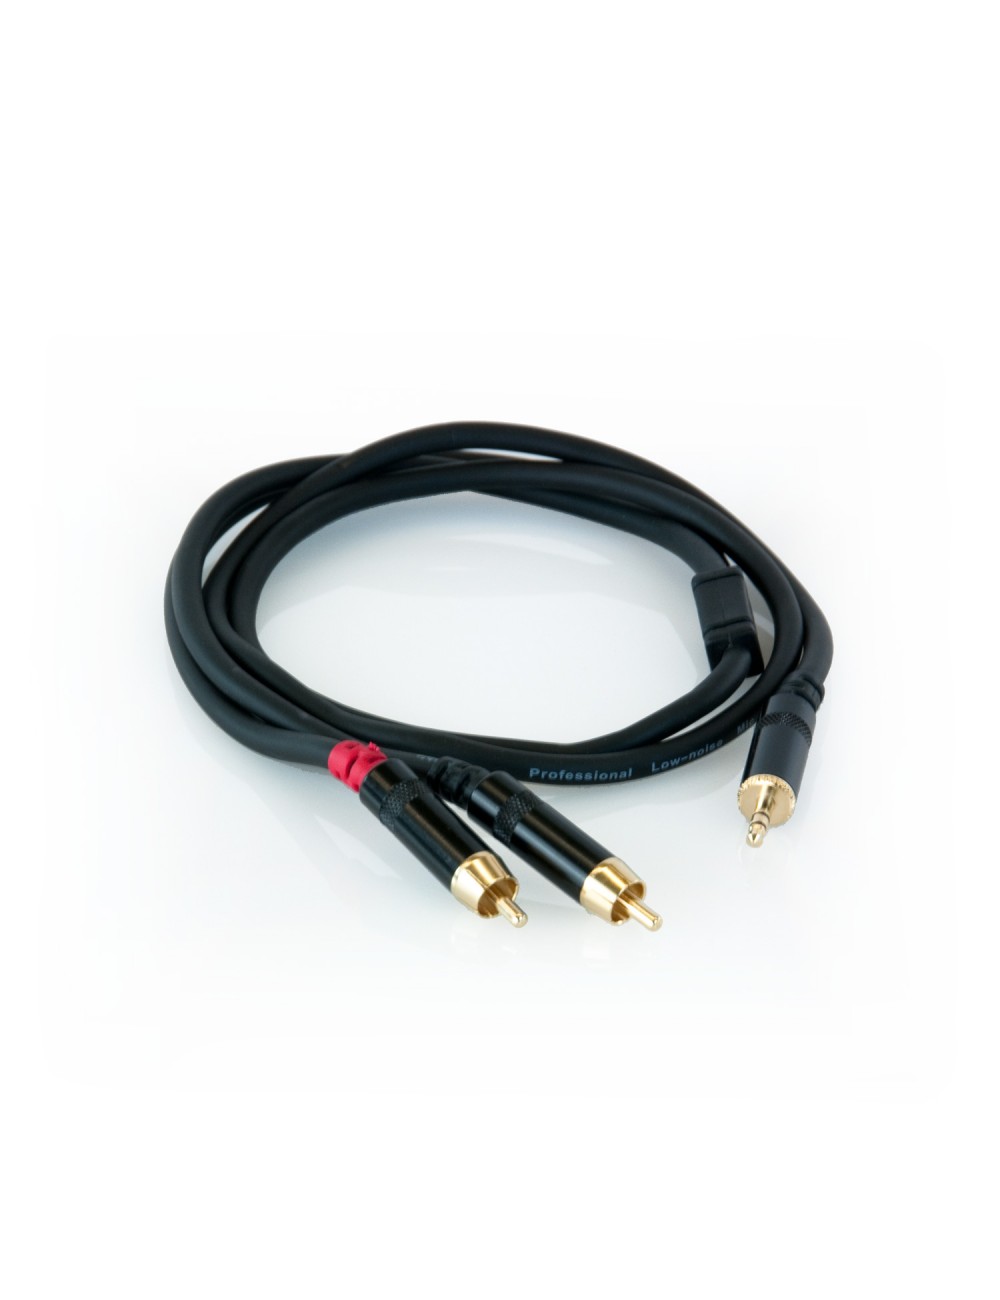 Jack cable 3.5mm STEREO male to 2RCA male 1m Master Audio RCA351 - 1